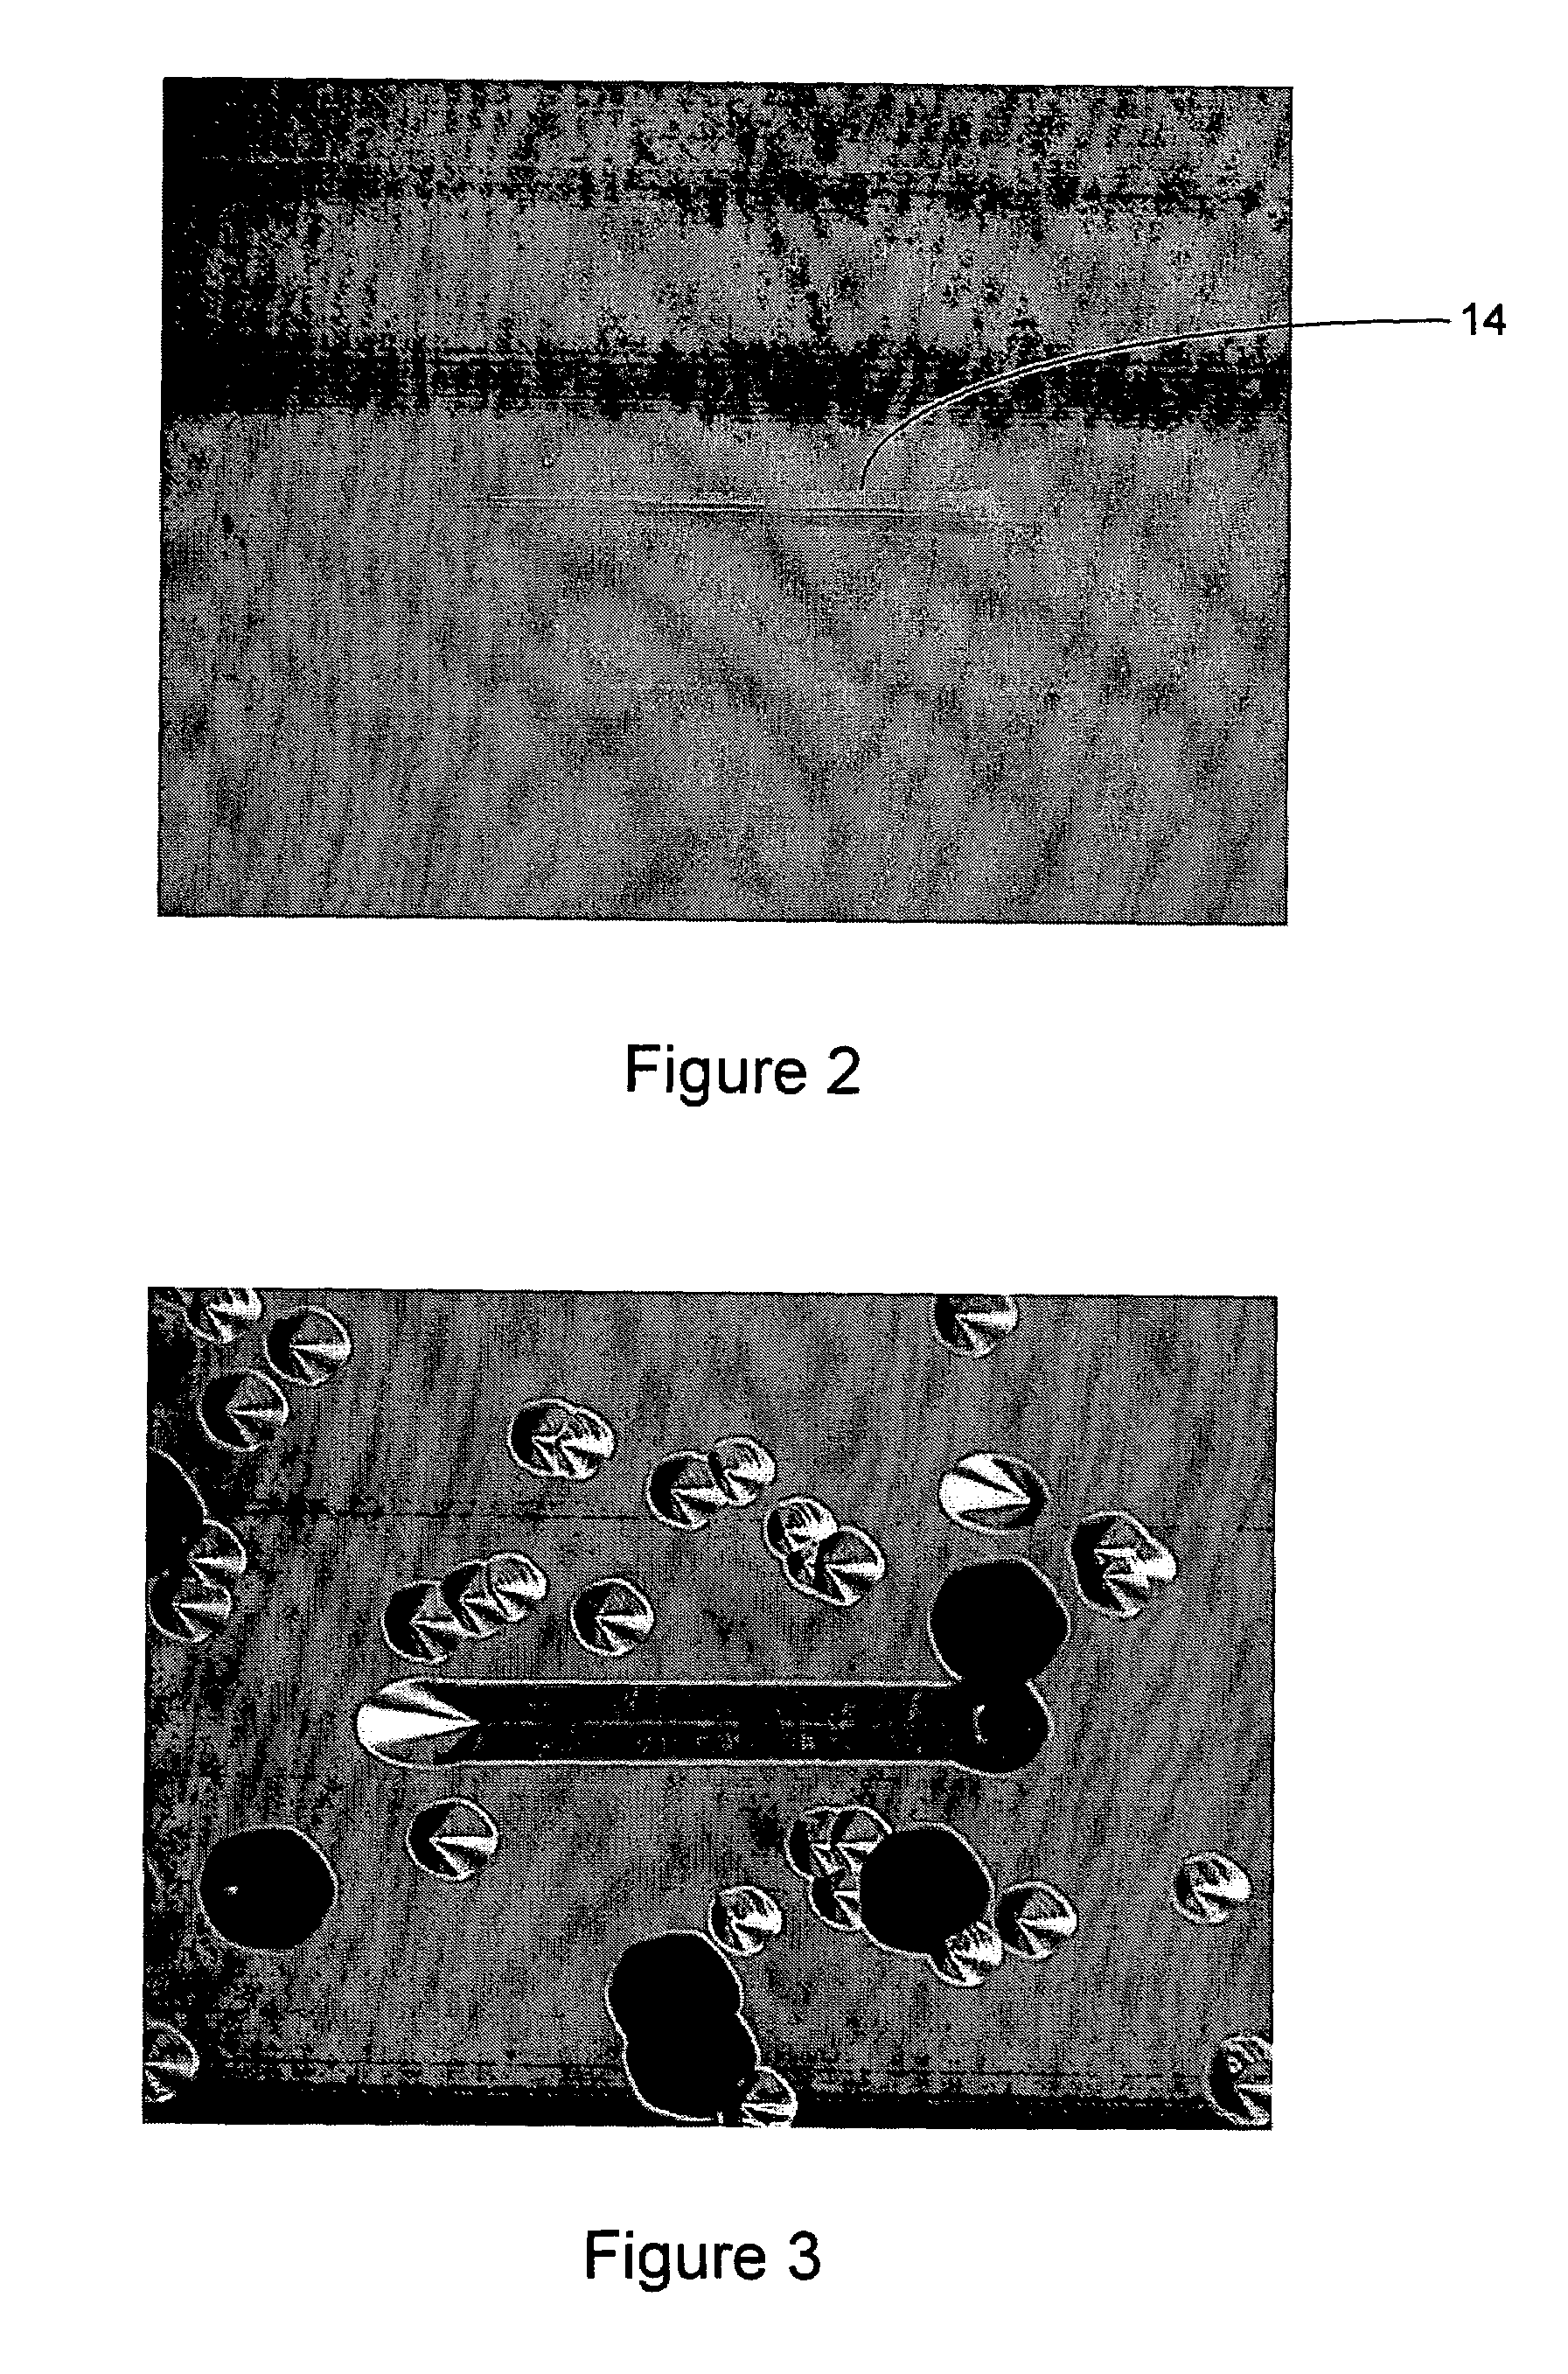 Method to reduce stacking fault nucleation sites and reduce forward voltage drift in bipolar devices